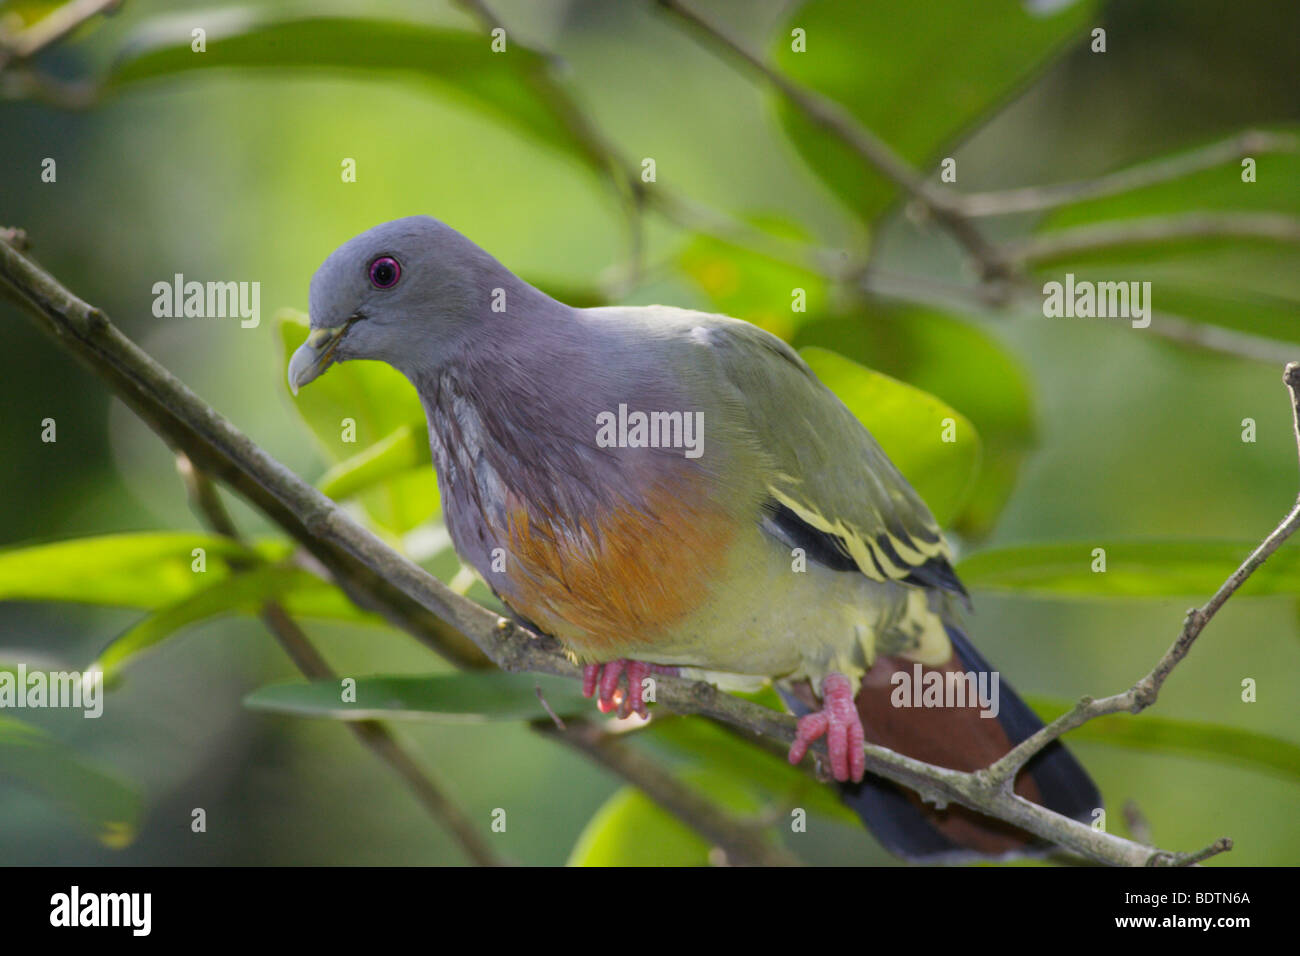 A common bird as seen in Malaysian tropical rainforests. Stock Photo